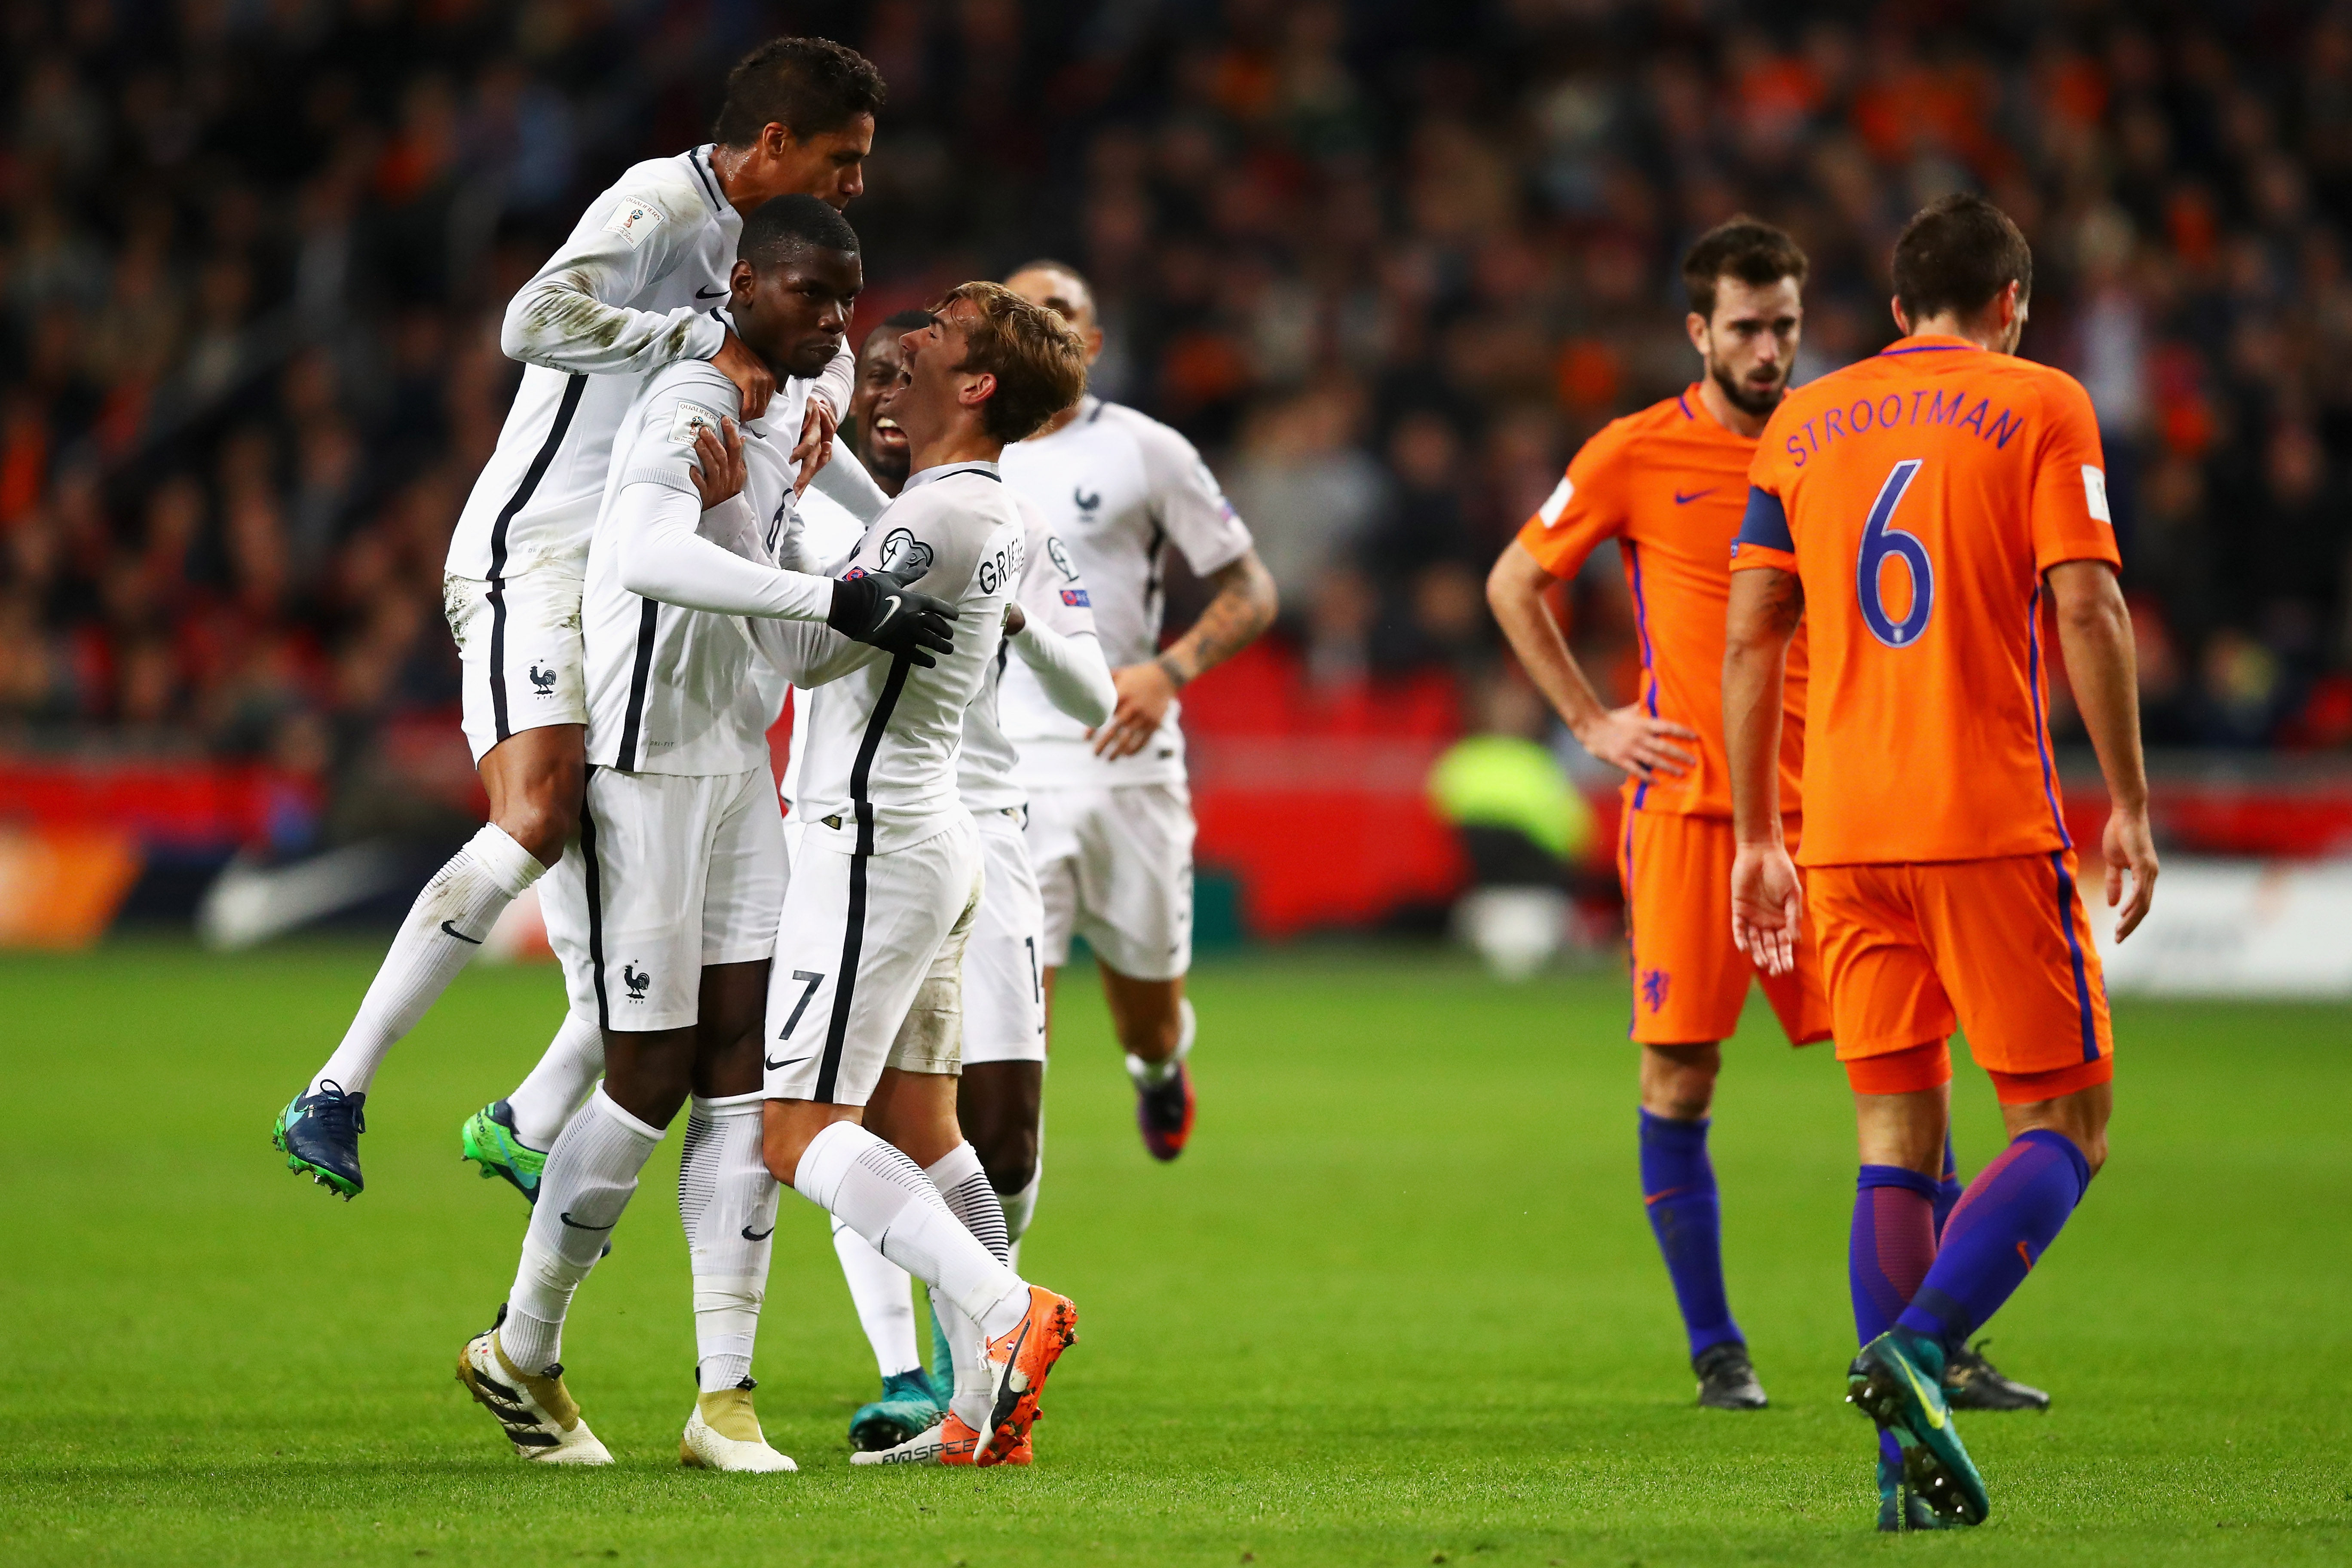 AMSTERDAM, NETHERLANDS - OCTOBER 10:  Paul Pogba of France celebrates scoring his teams first goal of the game with team mates during the FIFA 2018 World Cup Qualifier between Netherlands and France held at Amsterdam Arena on October 10, 2016 in Amsterdam, Netherlands.  (Photo by Dean Mouhtaropoulos/Getty Images)